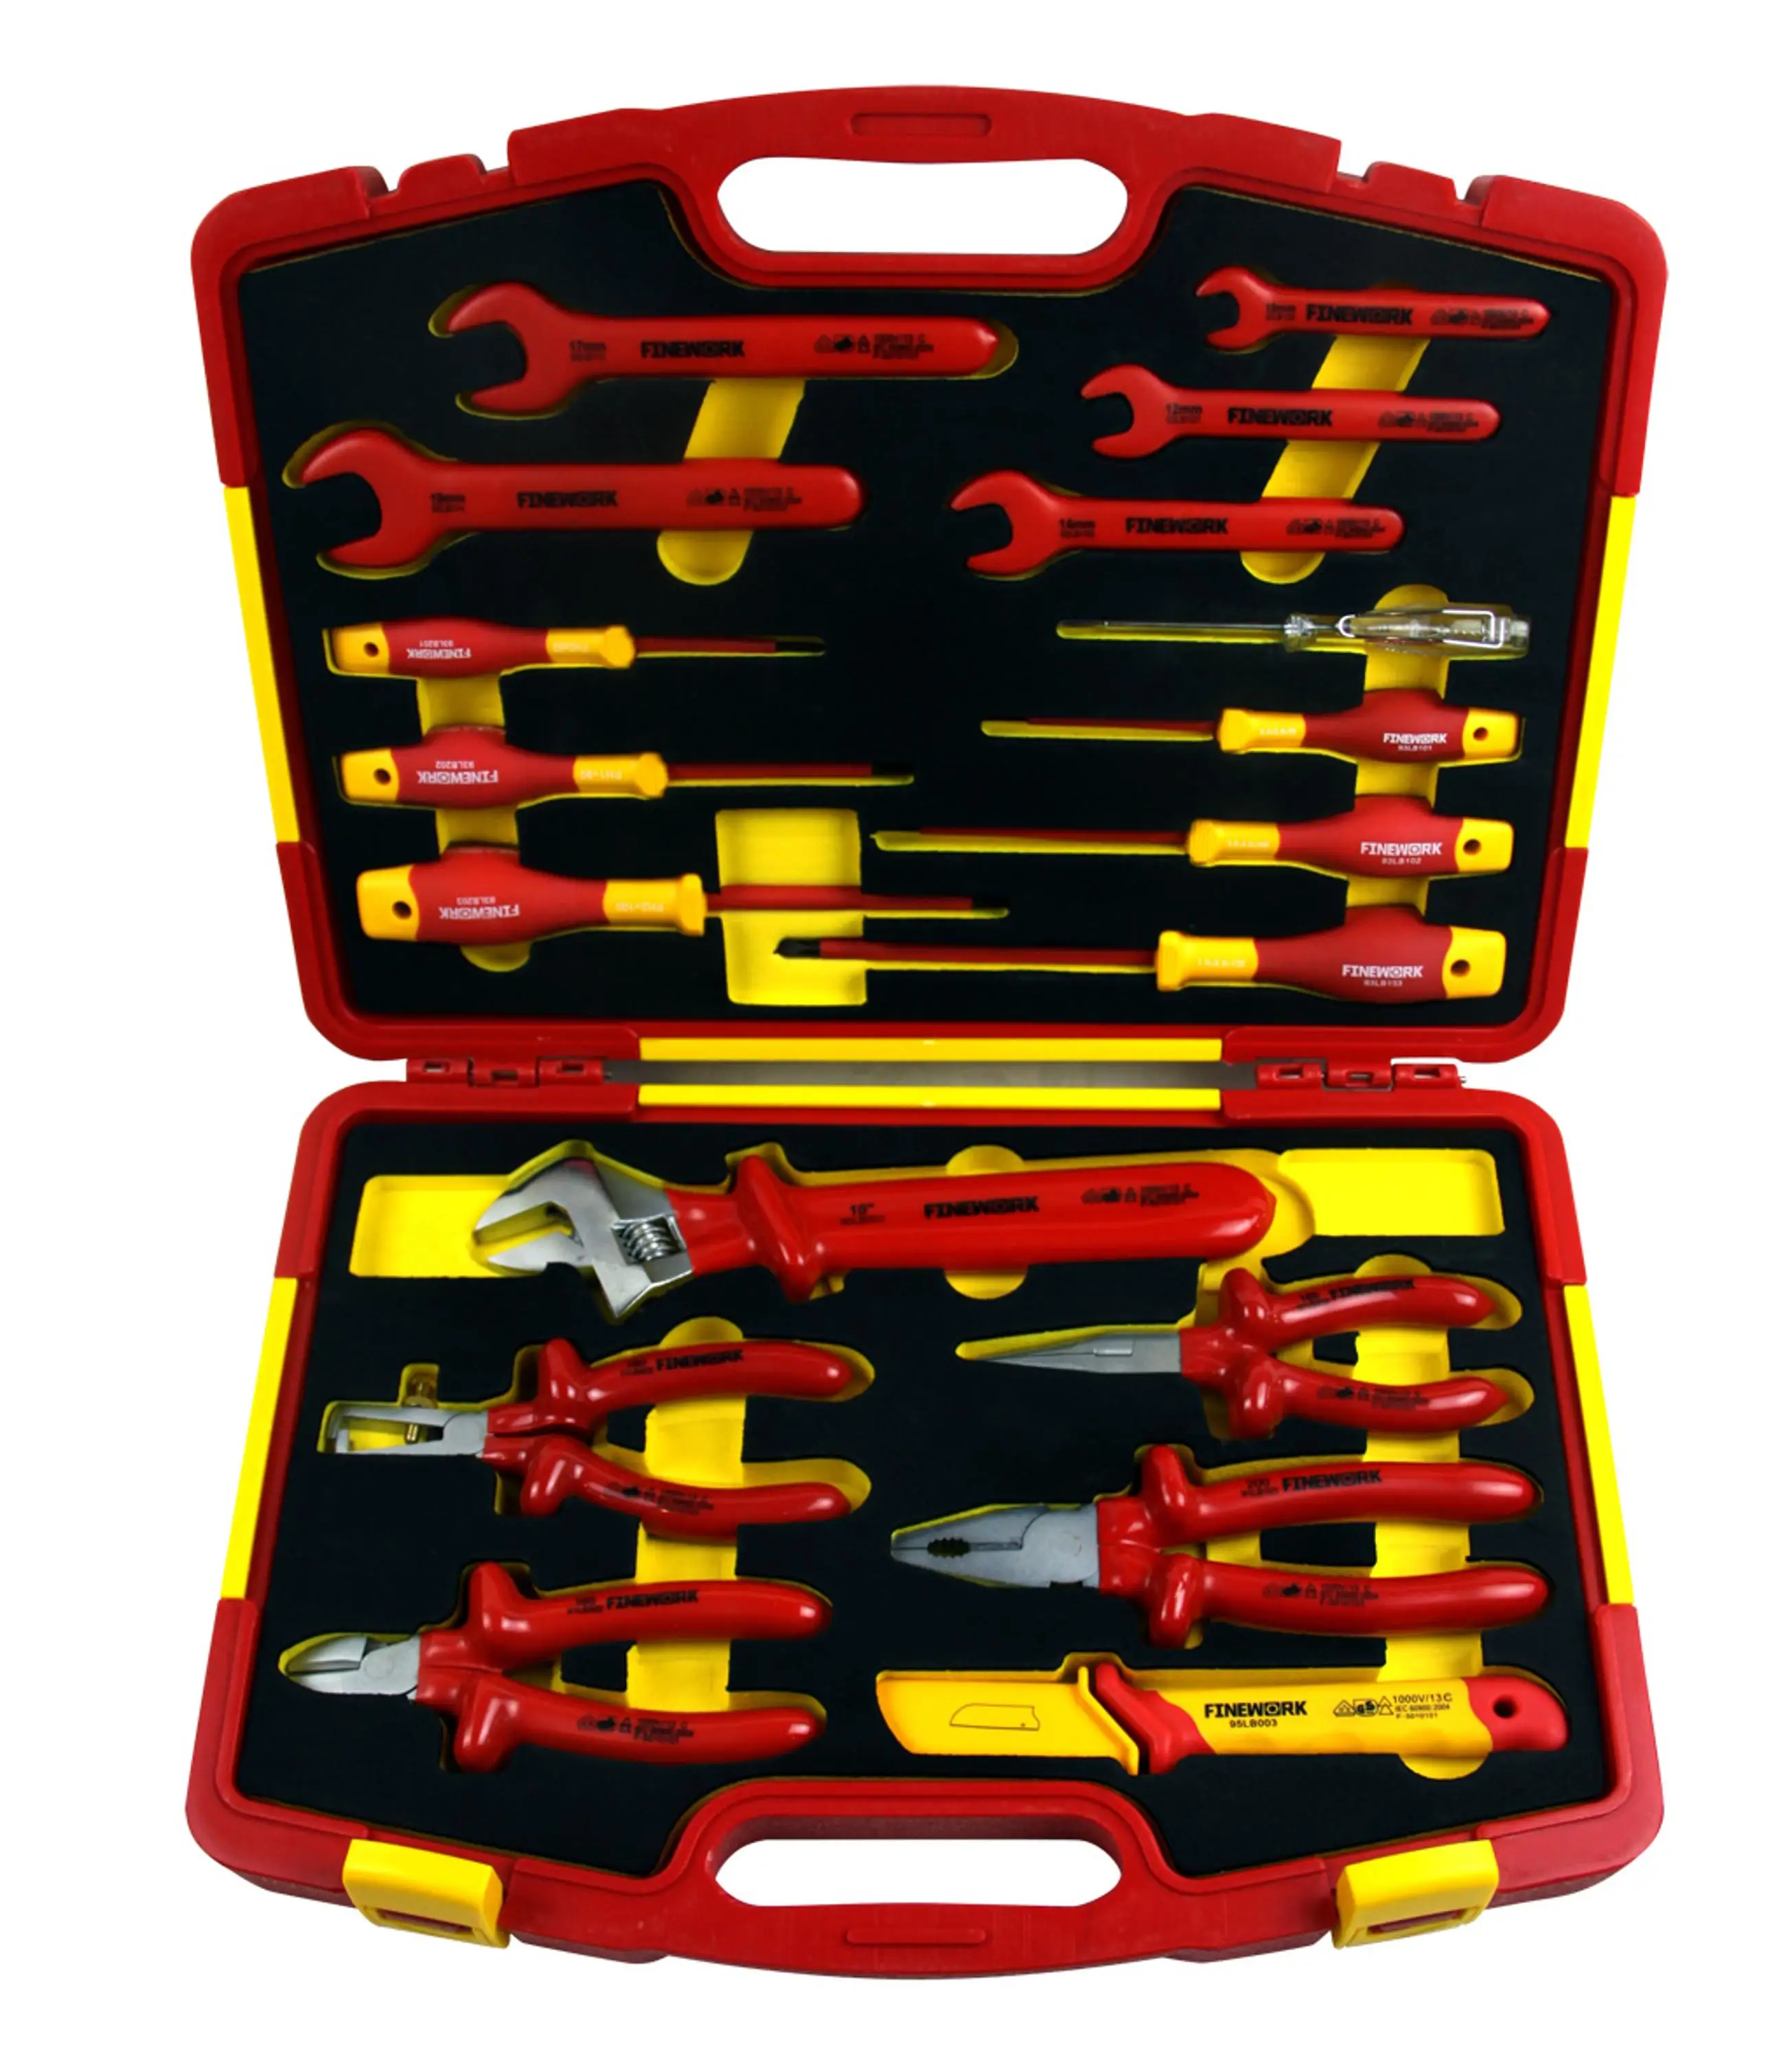 1000v vde insulated hand tools